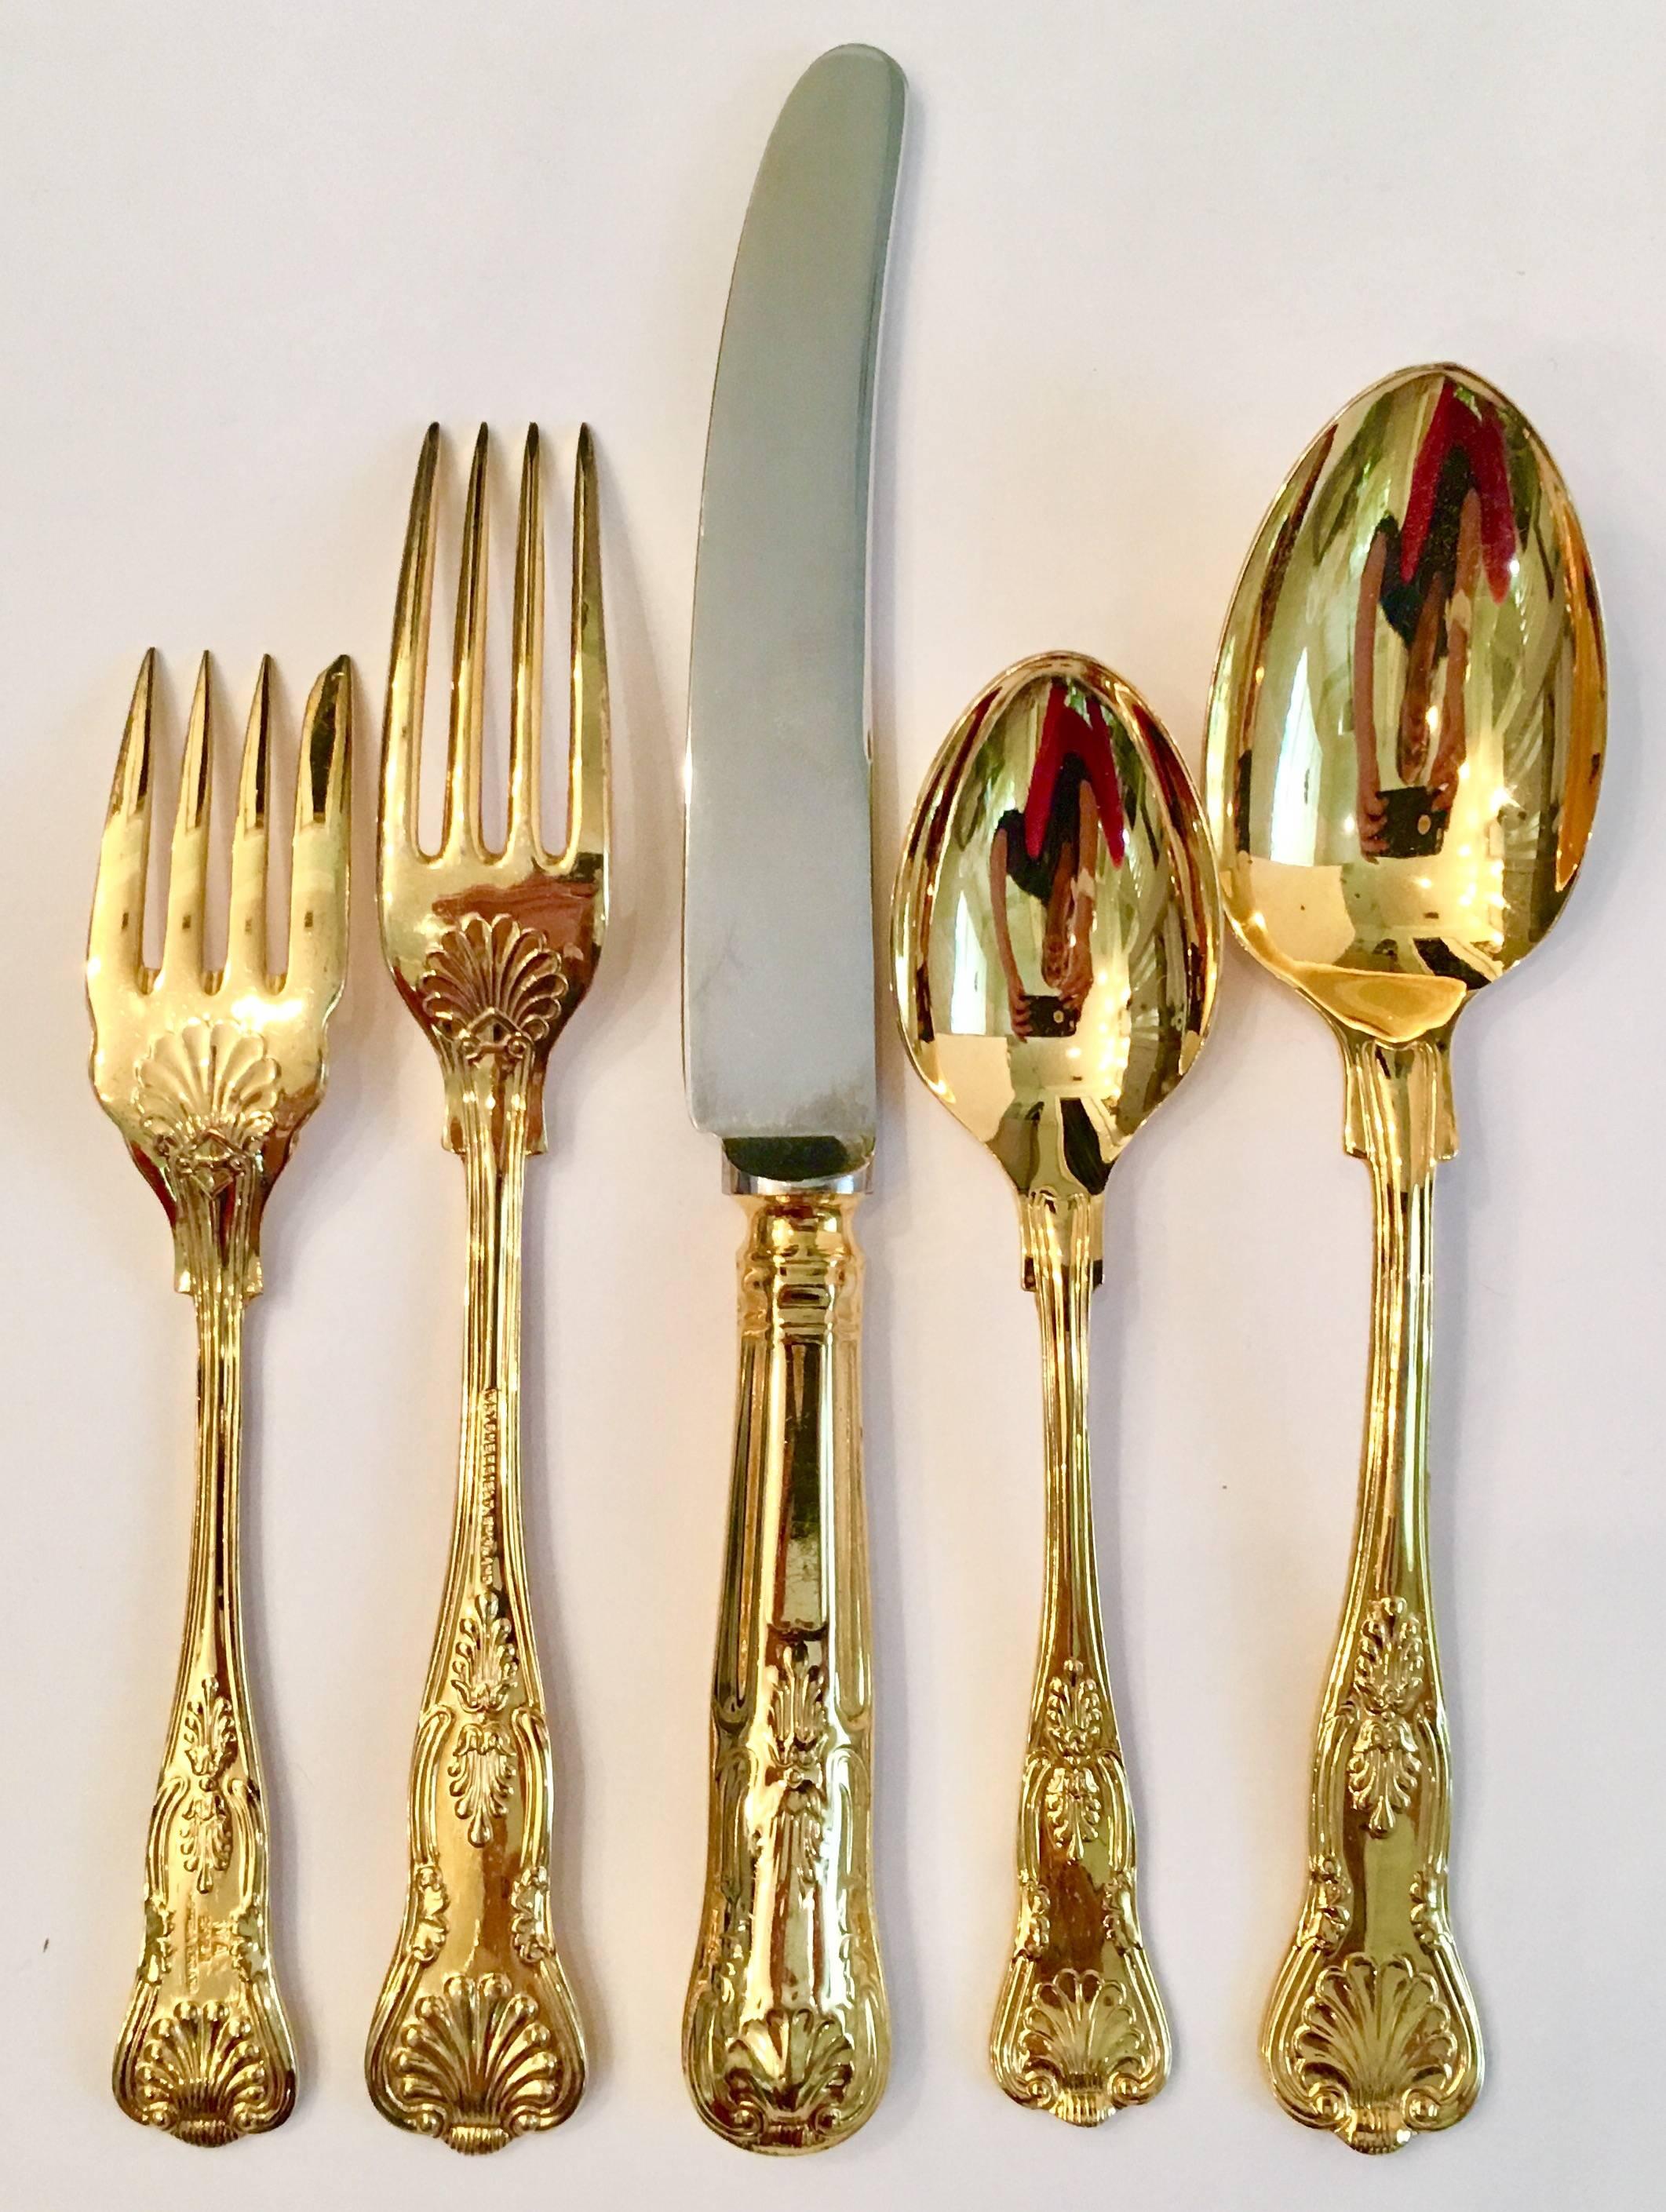 Sheffield England gold wash silver plate 55-piece flatware set in a scallop shell motif by, William Adams. Set includes eight, five-piece place settings, eight additional teaspoons and two serving spoons. Knife blade is stainless steel. Each piece